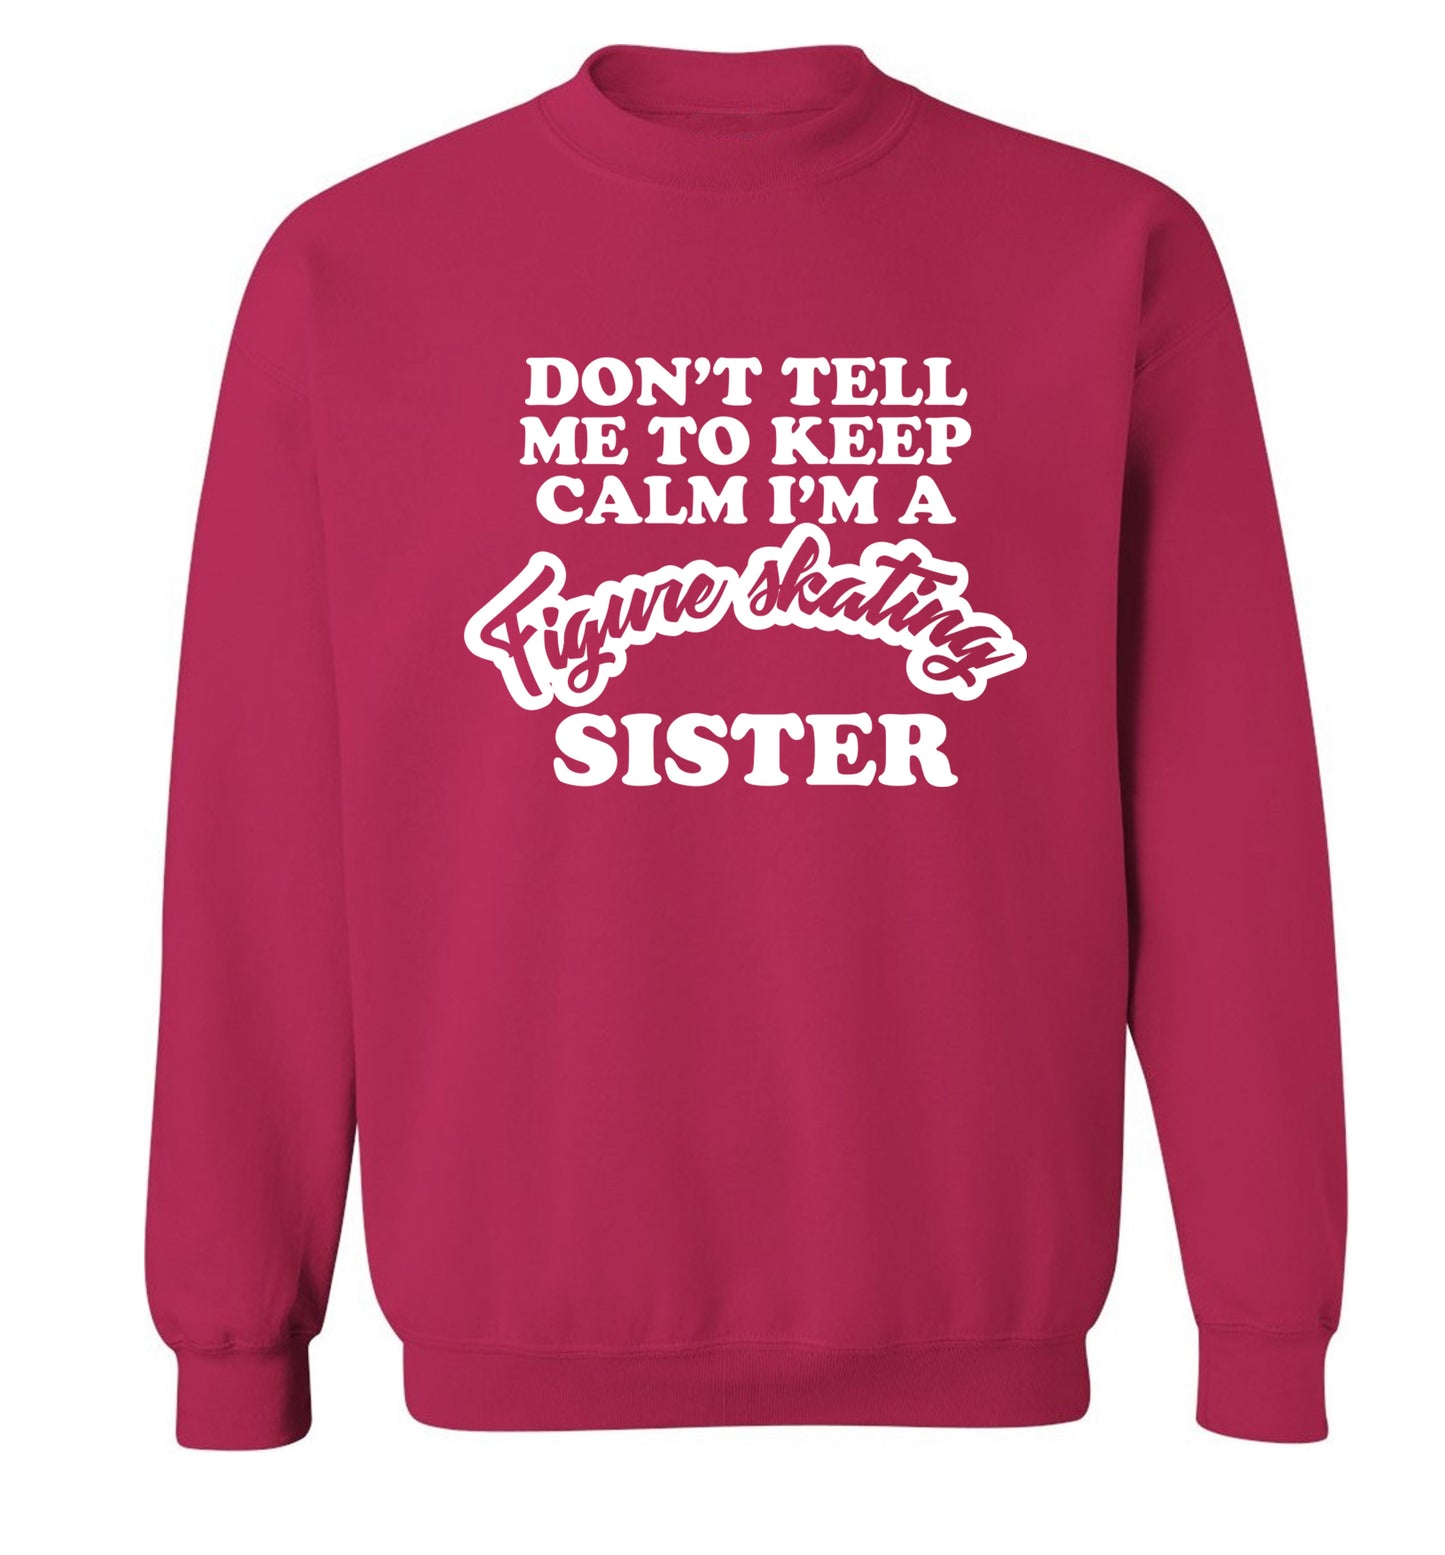 Don't tell me to keep calm I'm a figure skating sister Adult's unisexpink Sweater 2XL